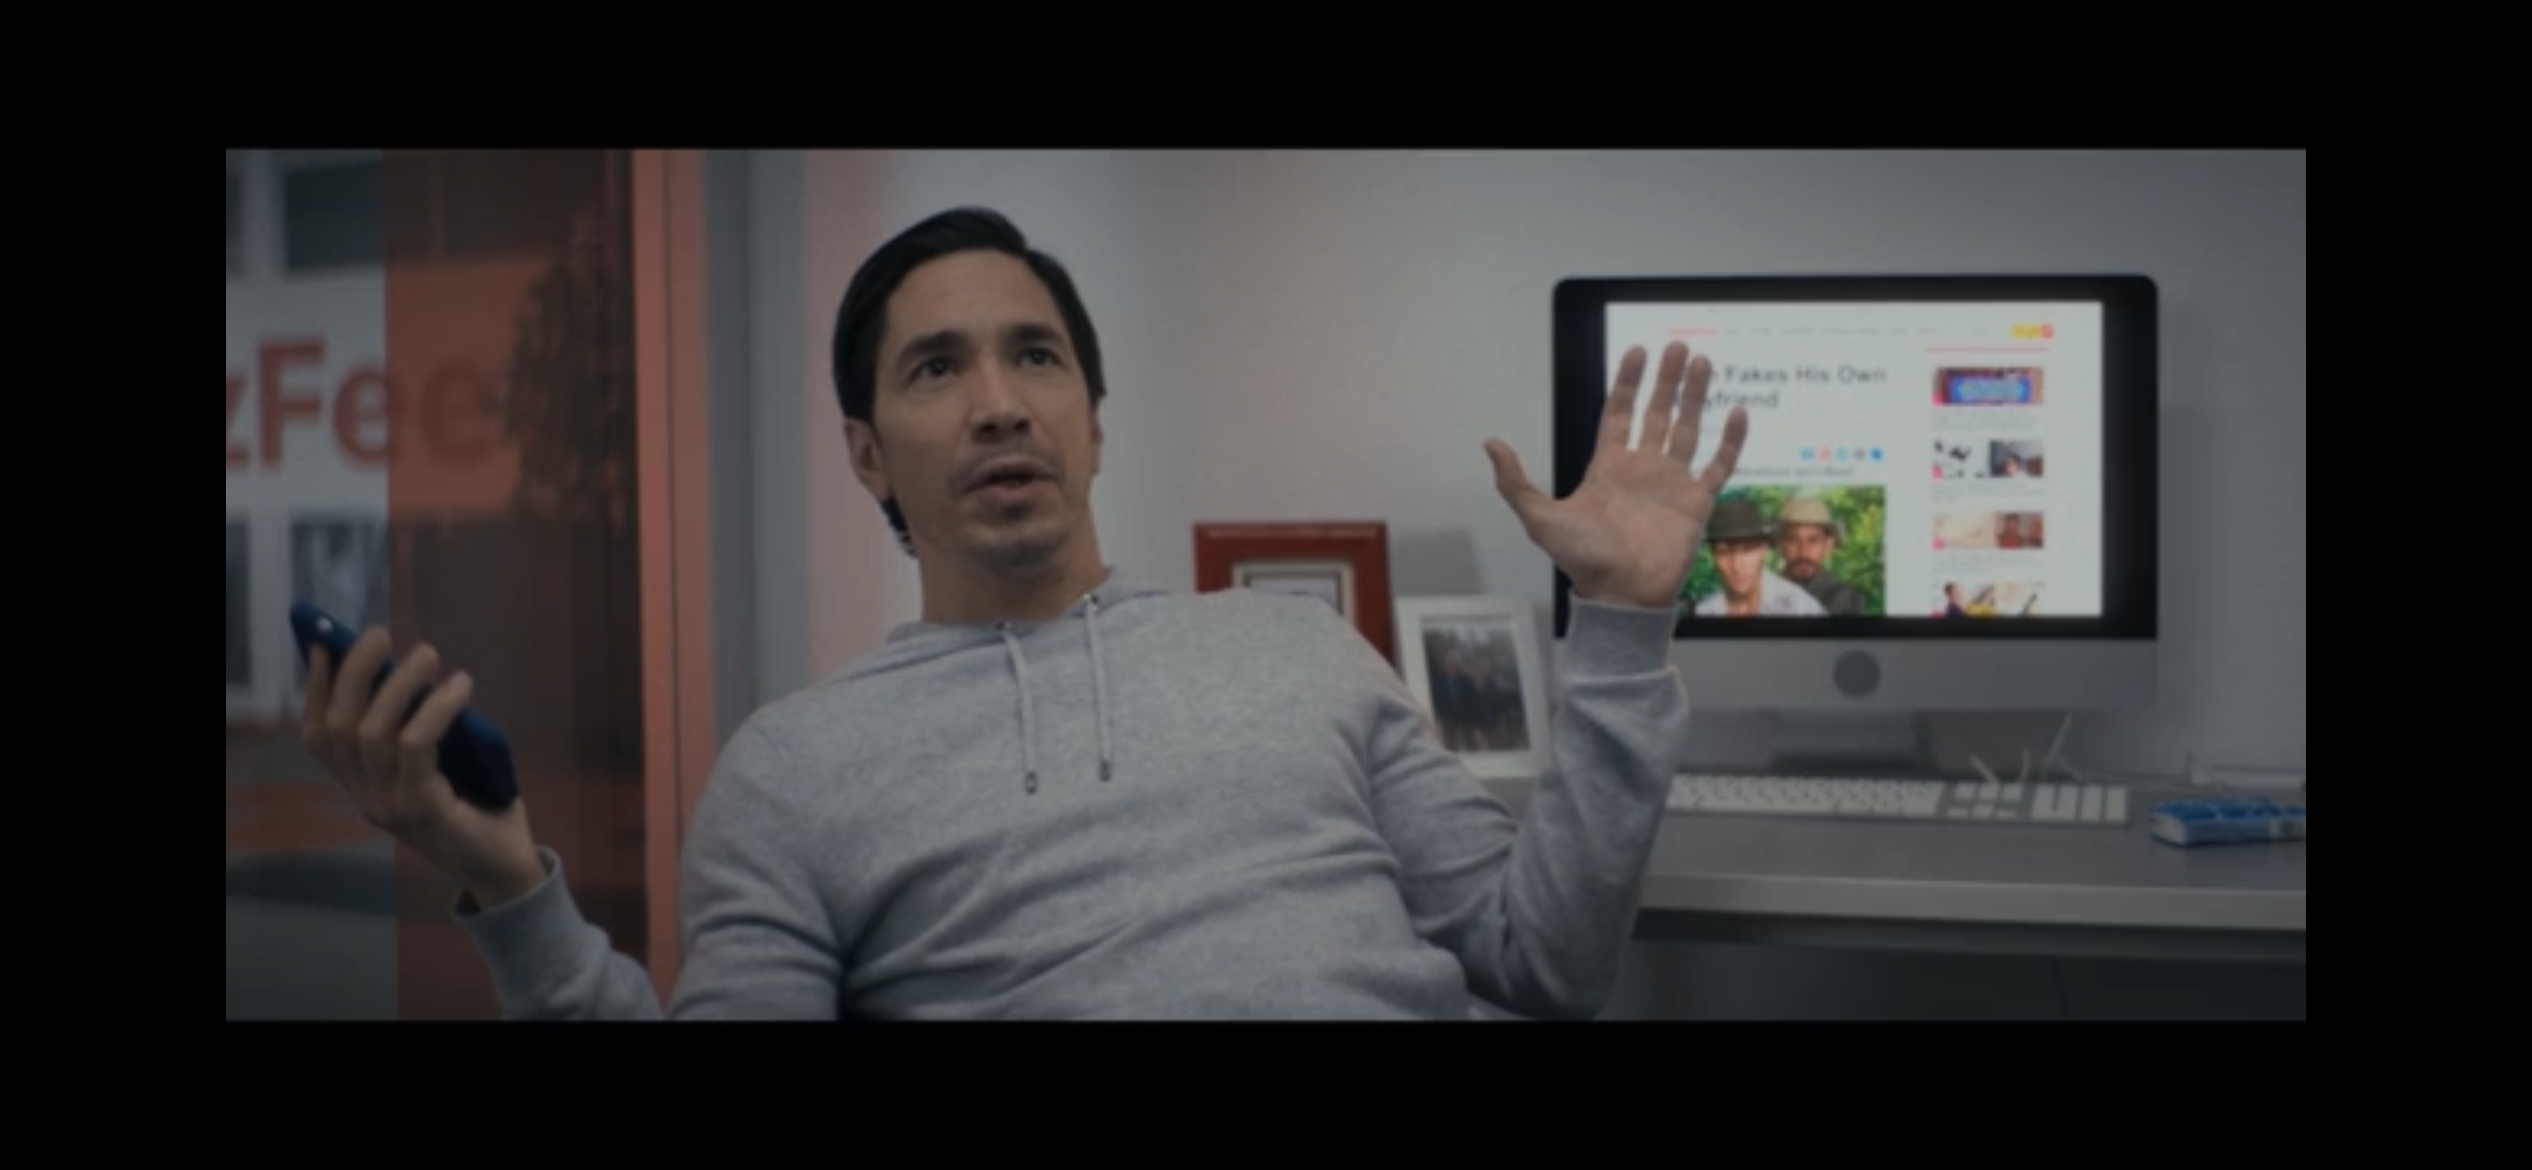 justin long in office